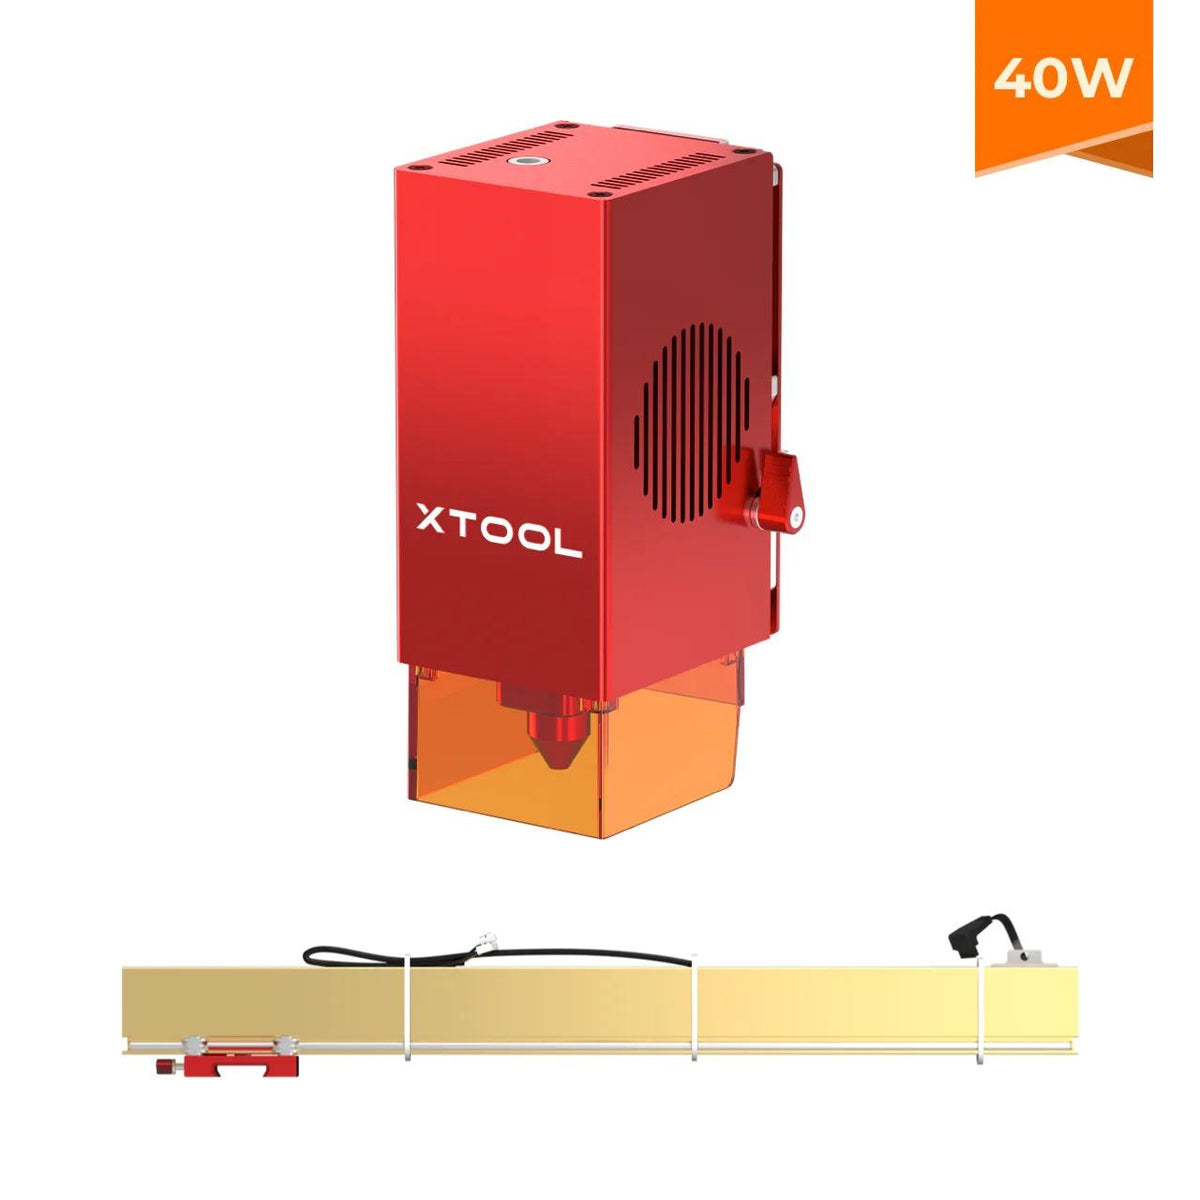 XTool 40W Laser Module for D1 Pro